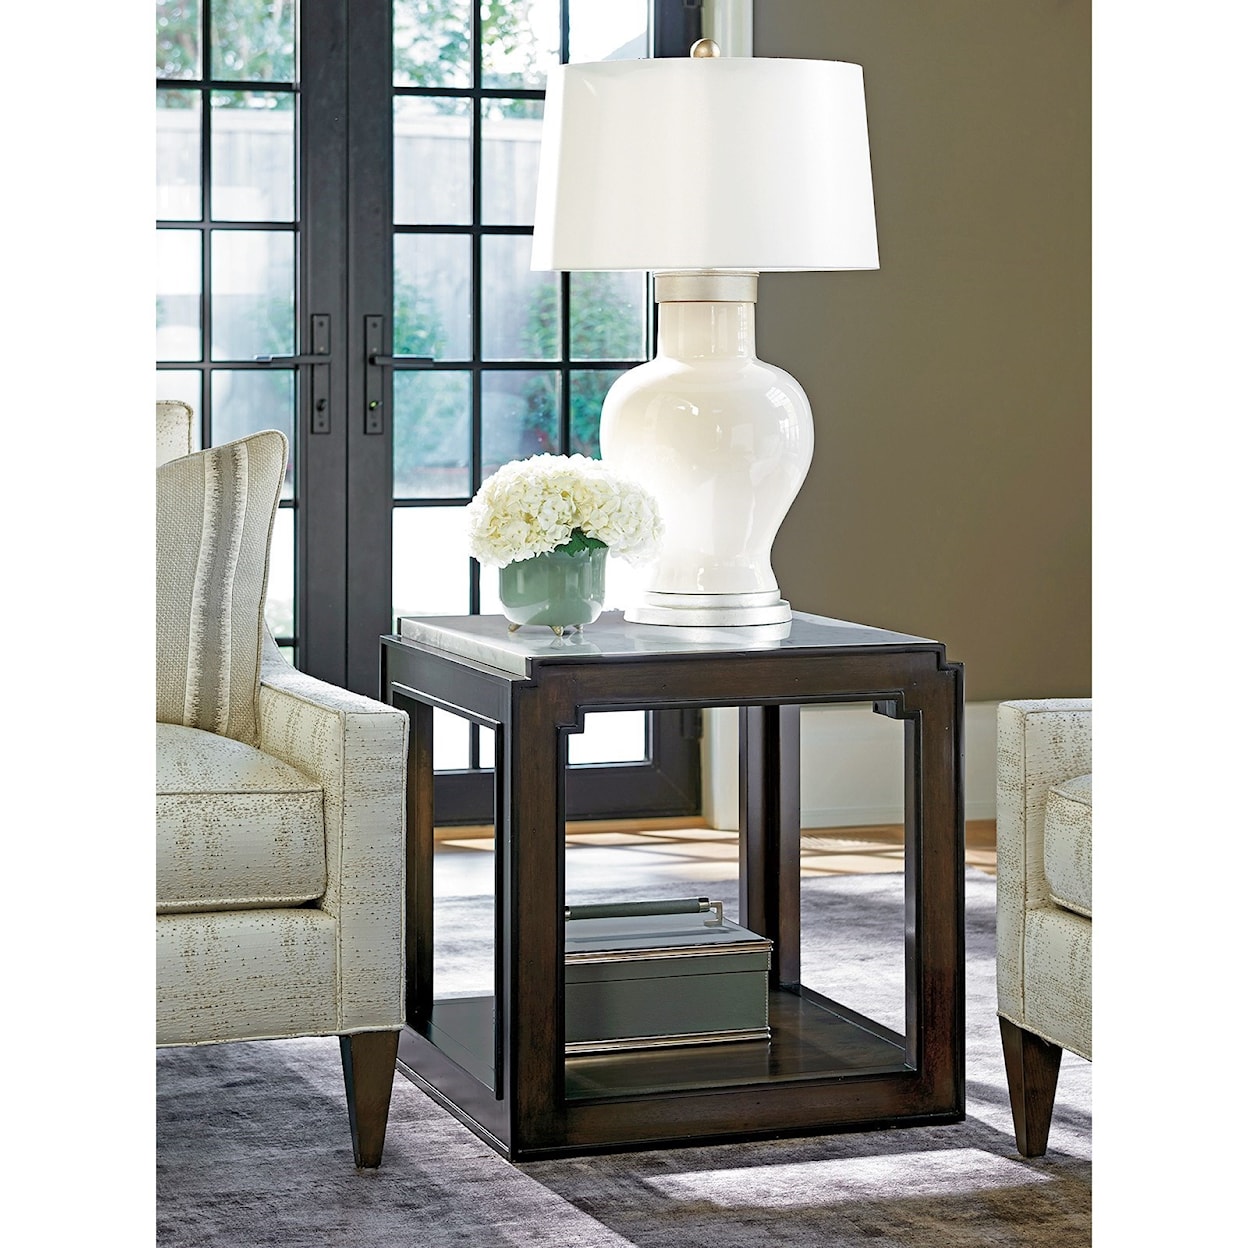 Barclay Butera Brentwood Doheny Lamp Table